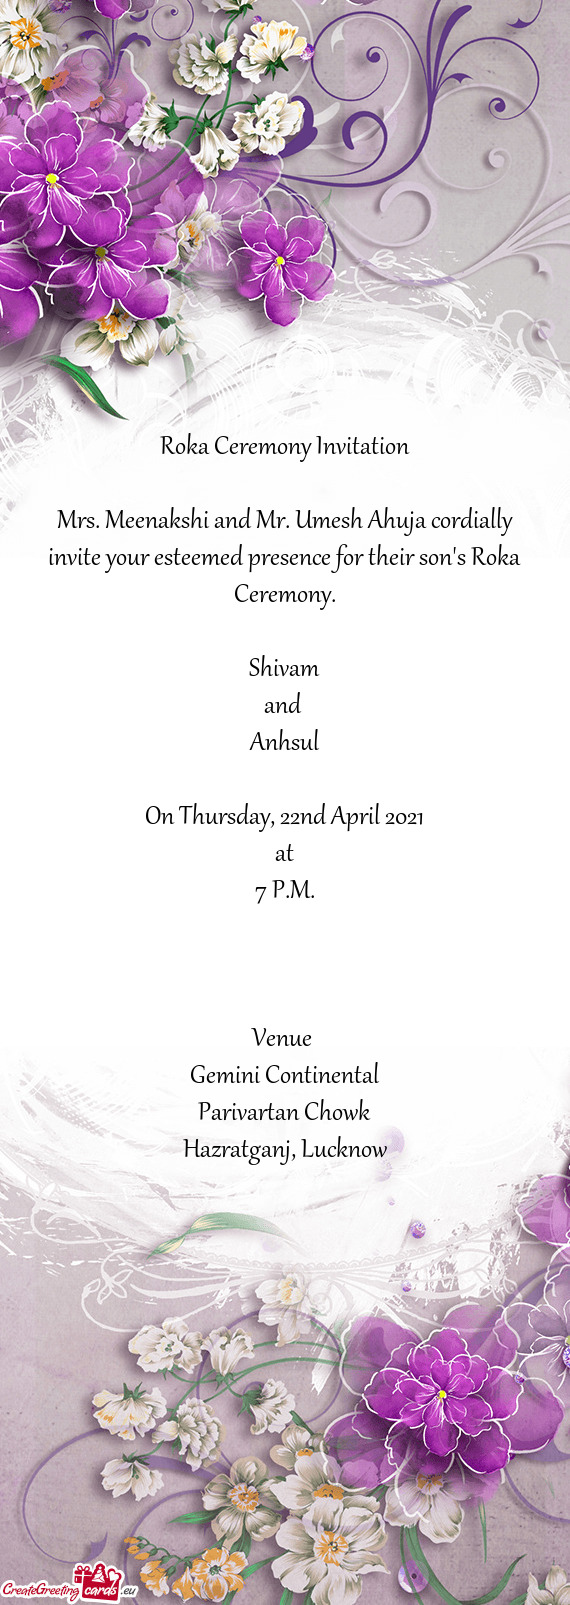 Mrs. Meenakshi and Mr. Umesh Ahuja cordially invite your esteemed presence for their son's Roka Cere